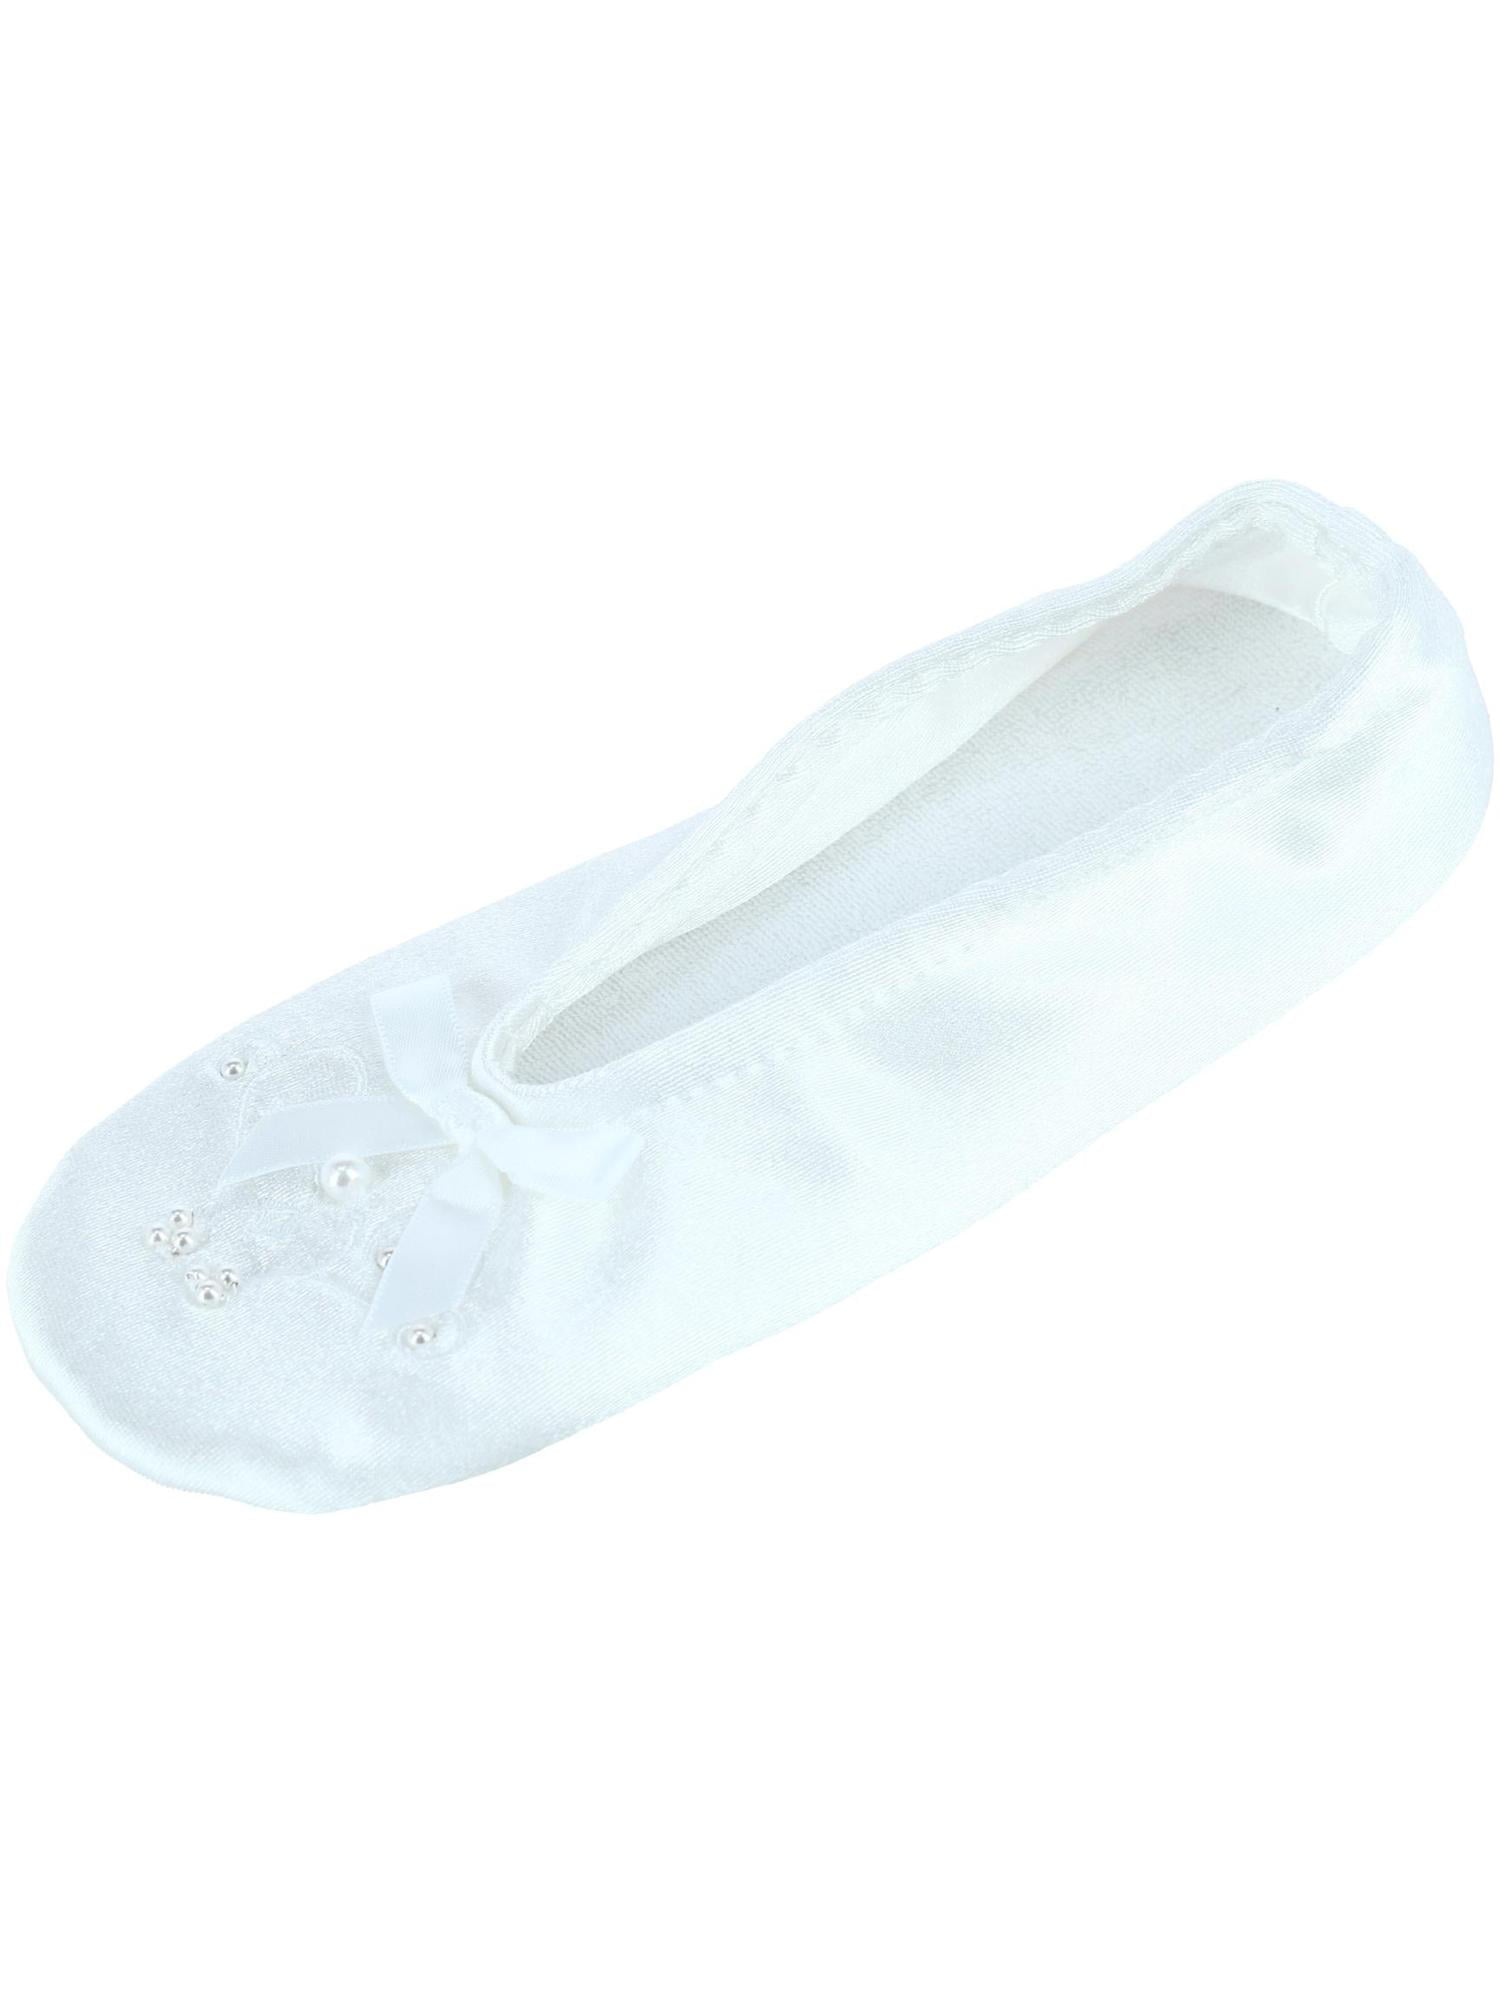 Ladies Isotoner Ballet Style Slippers IVORY BRIDE Pearl soft suede sole 